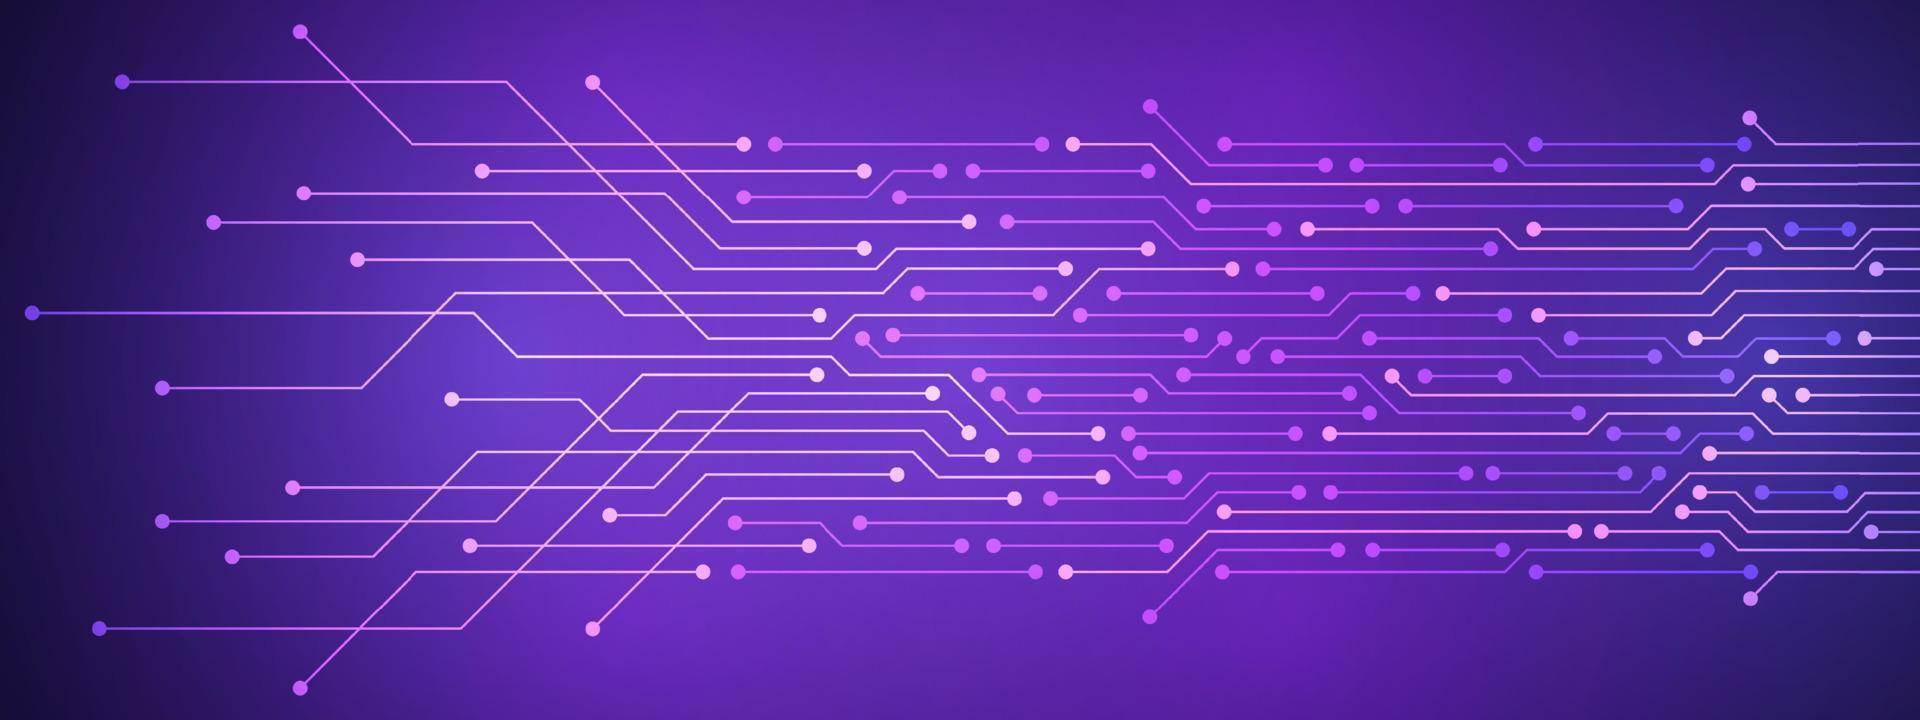 Abstract Digital Technology Background, purple circuit board pattern, microchip, power line vector